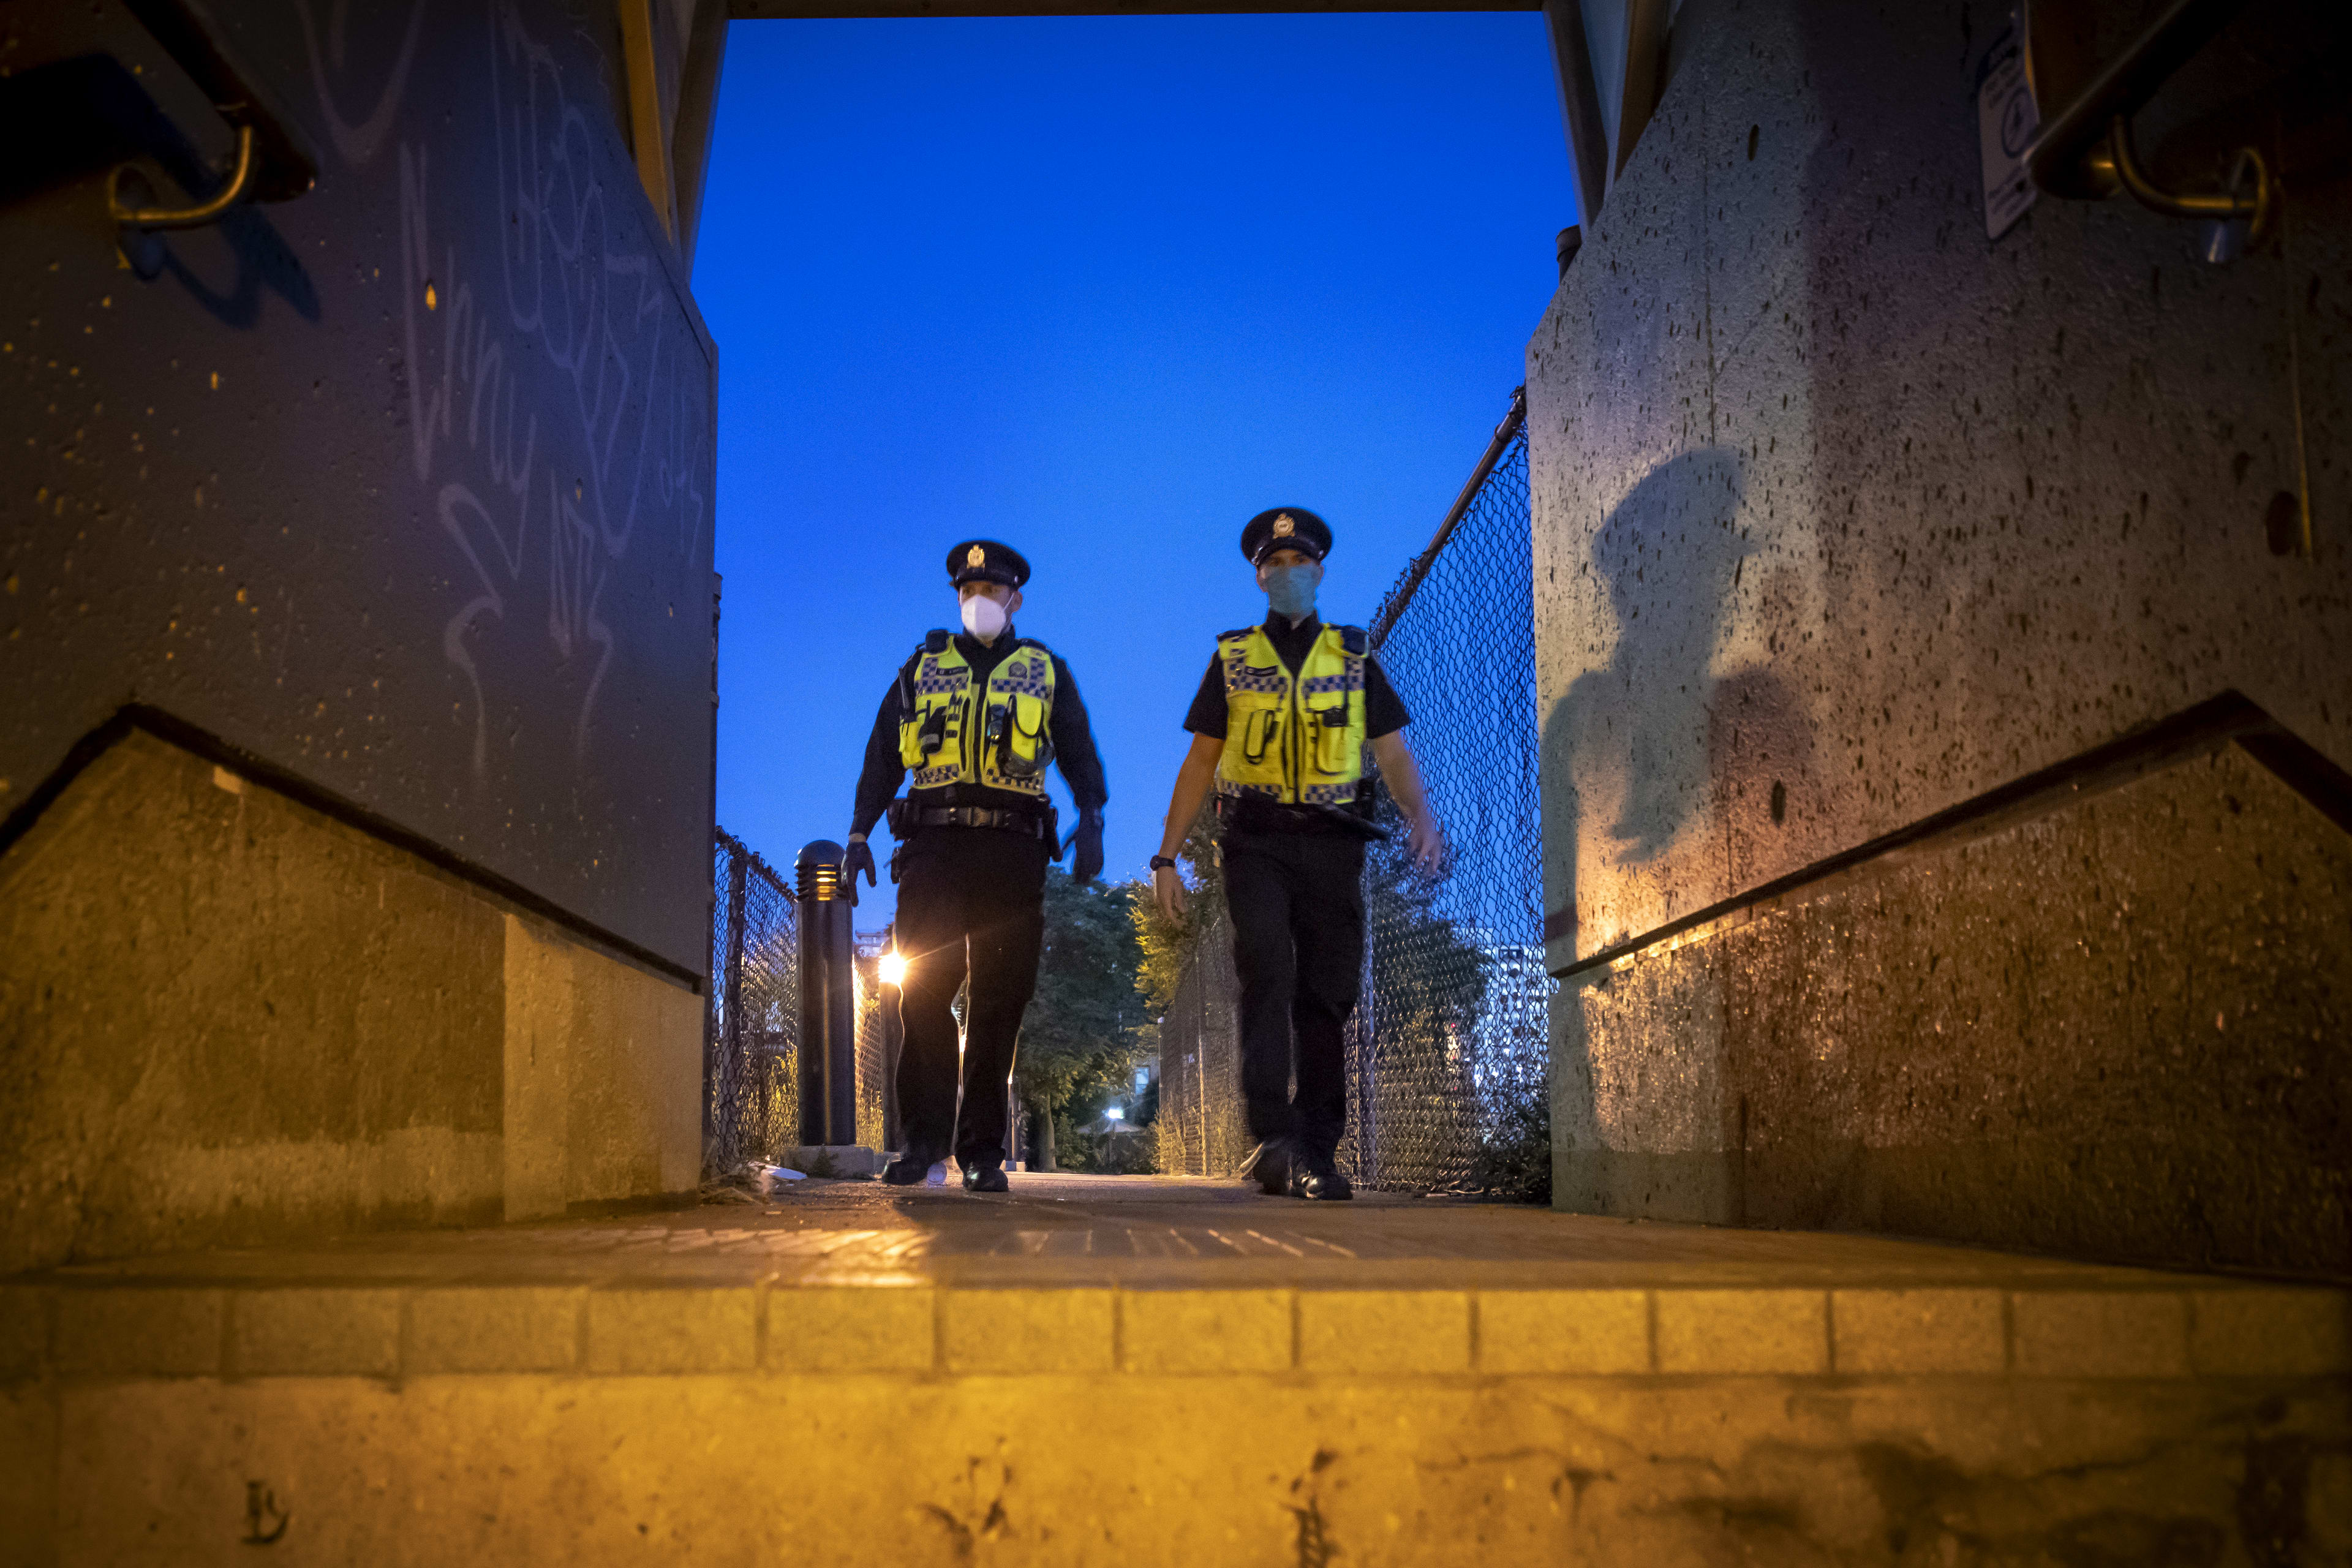 Two officer walk along a path.